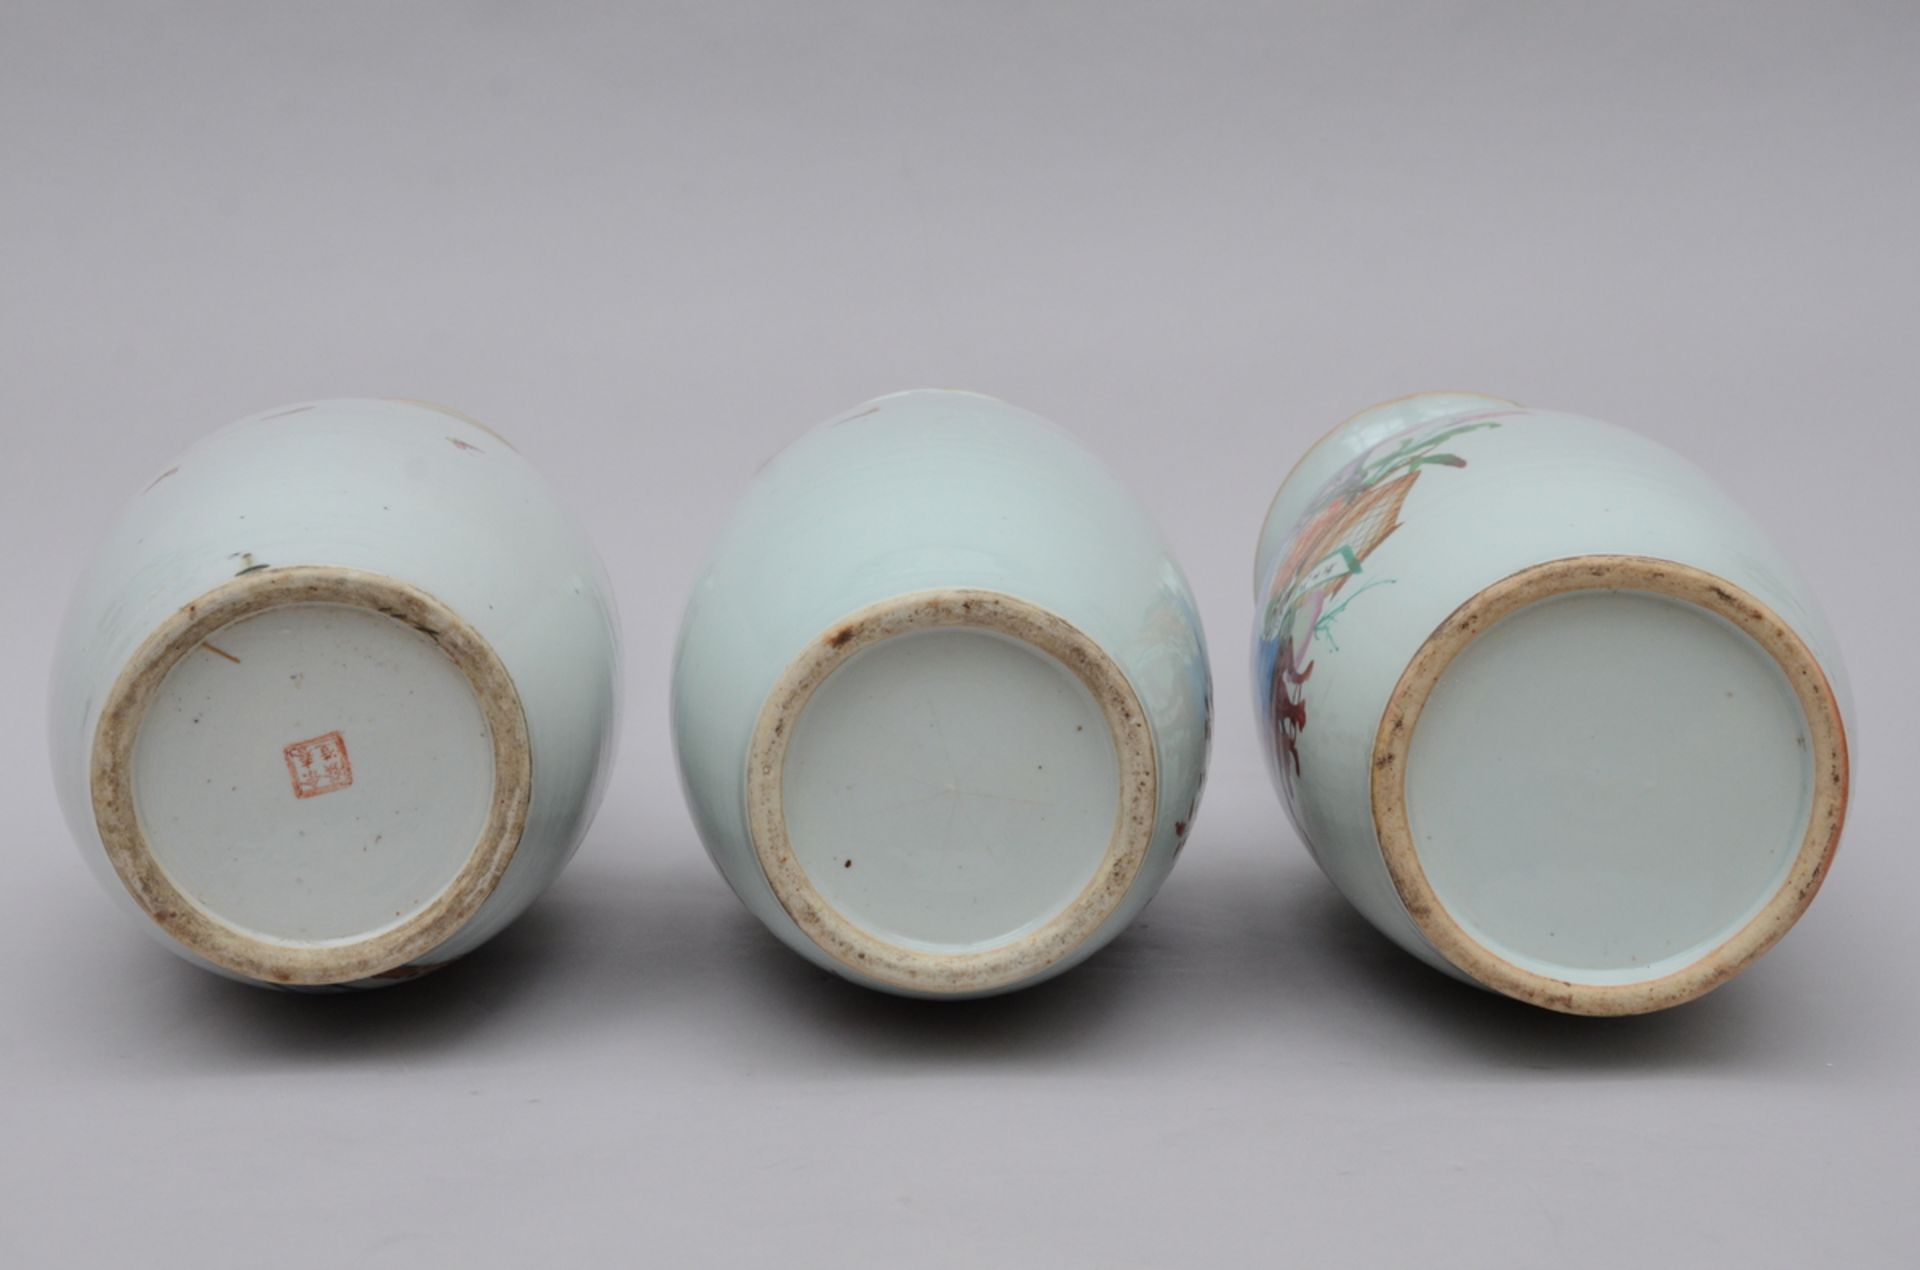 Lot: 3 Chinese vases 'antiquities', 'birds', 'flowers' (H 57.5, 58, 57 cm) - Image 4 of 4